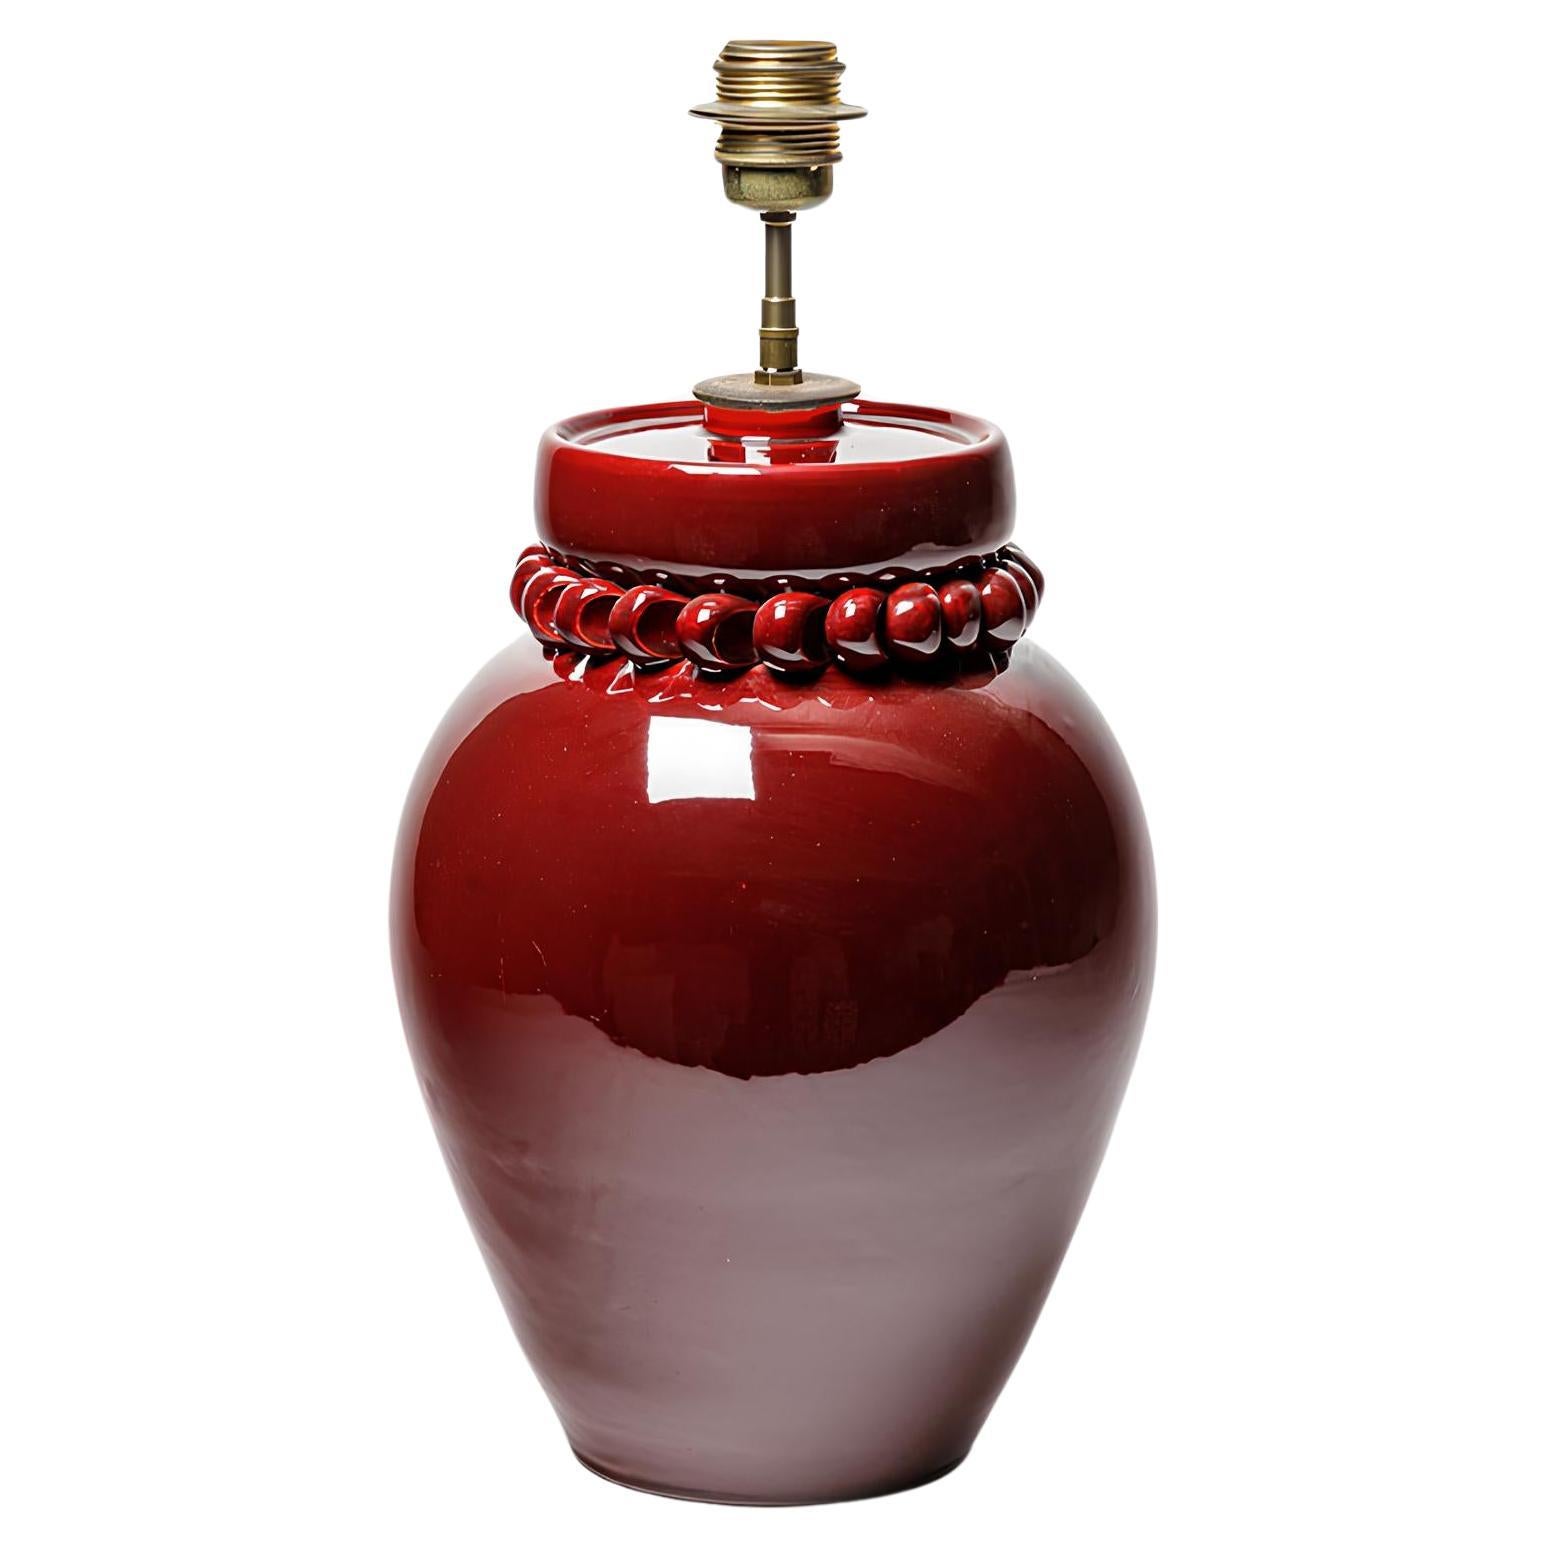  Red glazed ceramic table lamp by Pol Chambost, circa 1930-1950.  For Sale